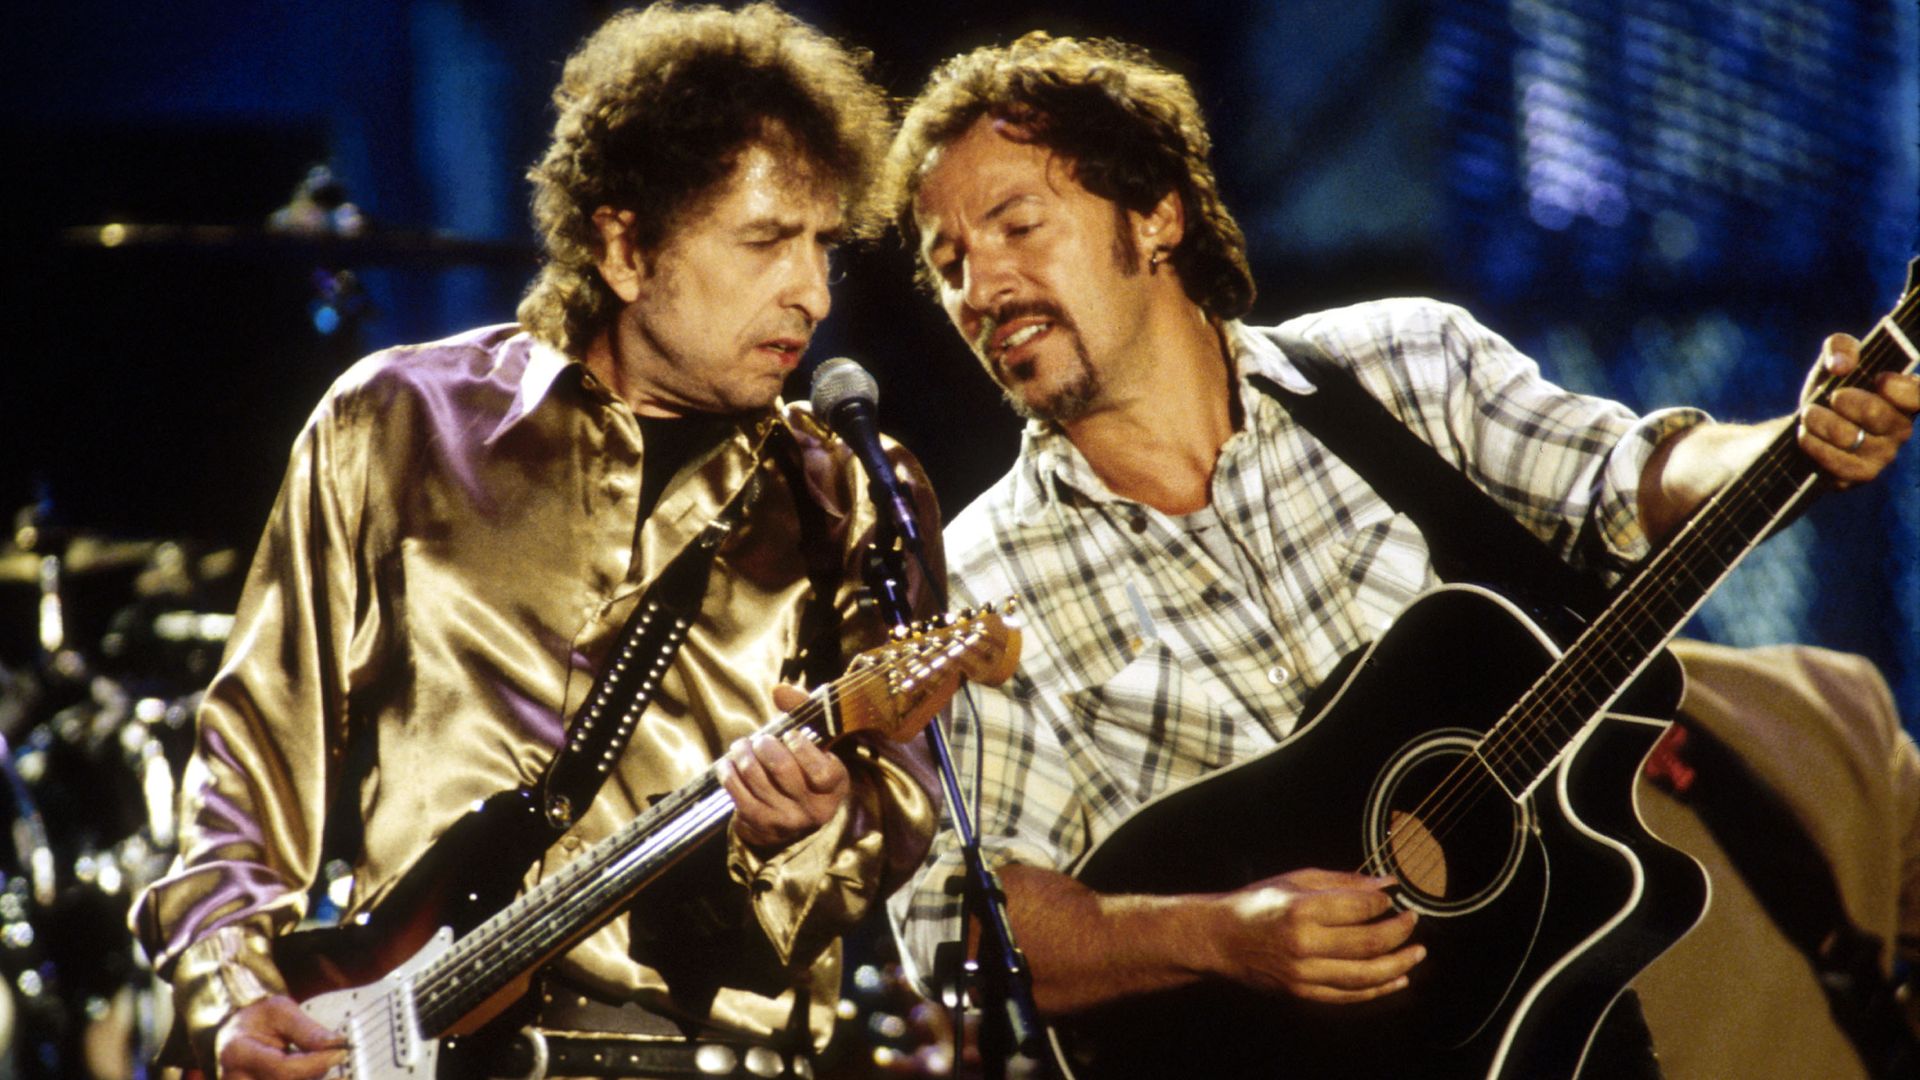 Bob Dylan and Bruce Springsteen perform on stage together.